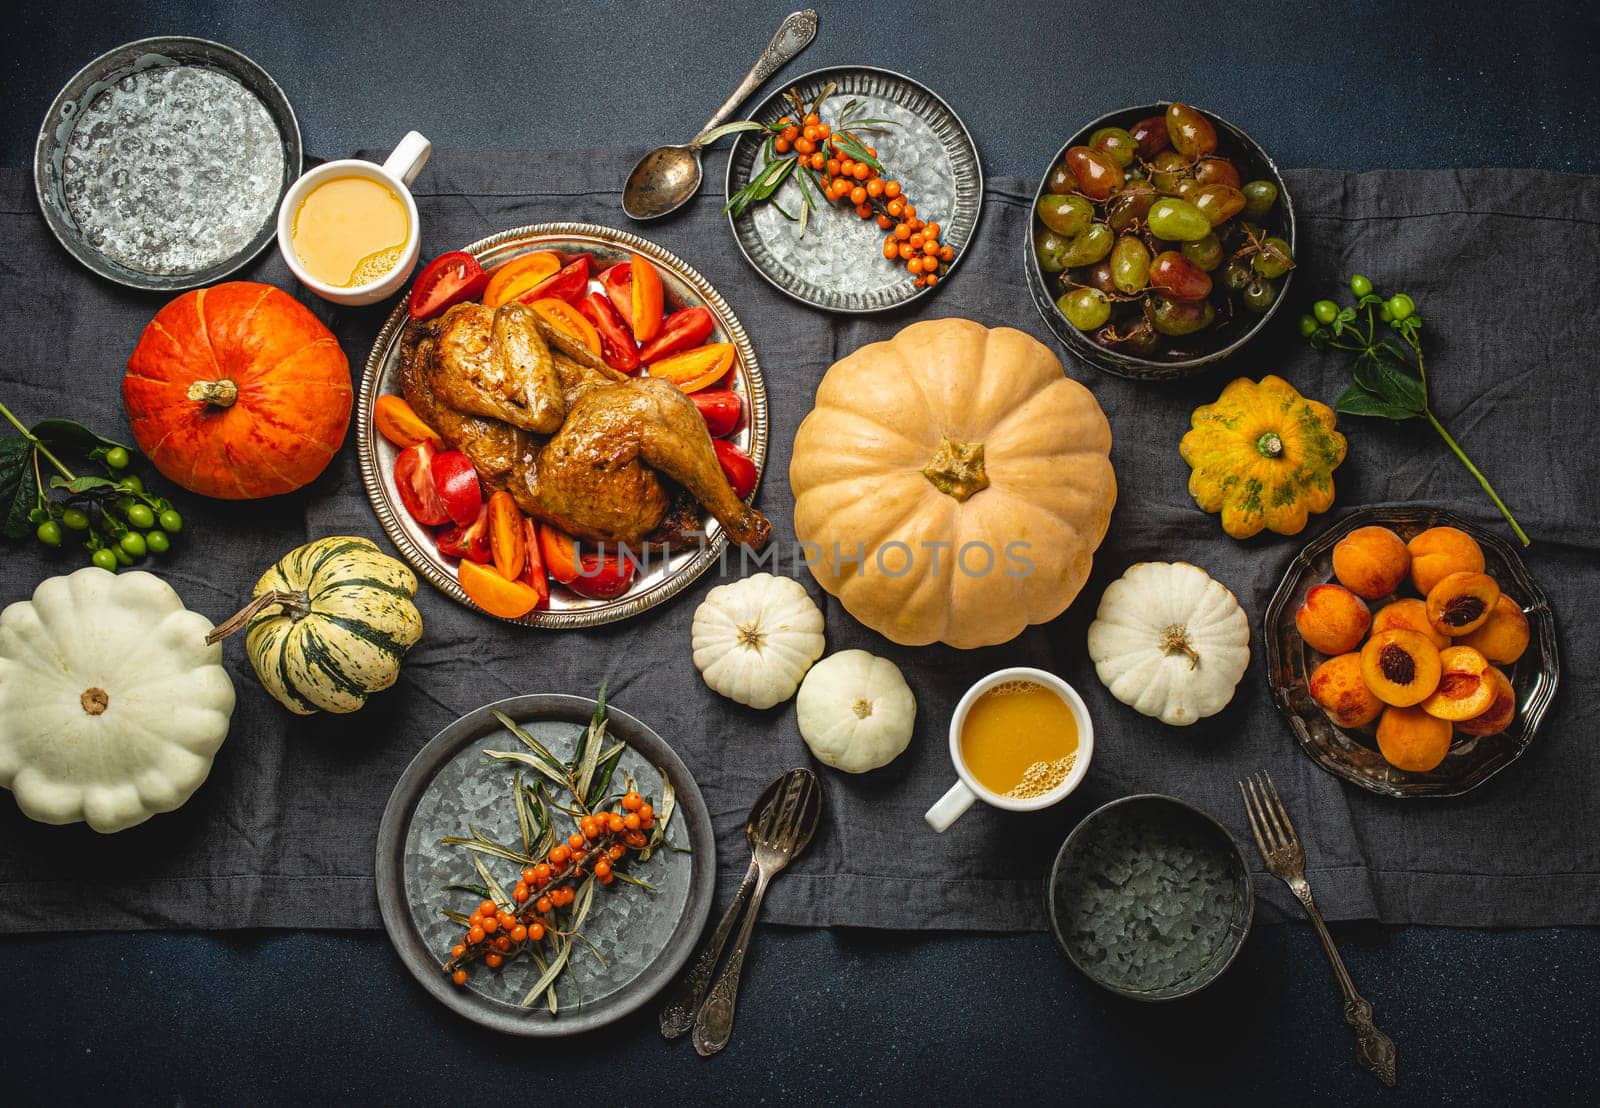 Thanksgiving festive table composition with roasted turkey, pumpkins, vegetable salad, fruit, orange beverage. Thanksgiving celebration dinner with traditional autumn meals on rustic dark table by its_al_dente